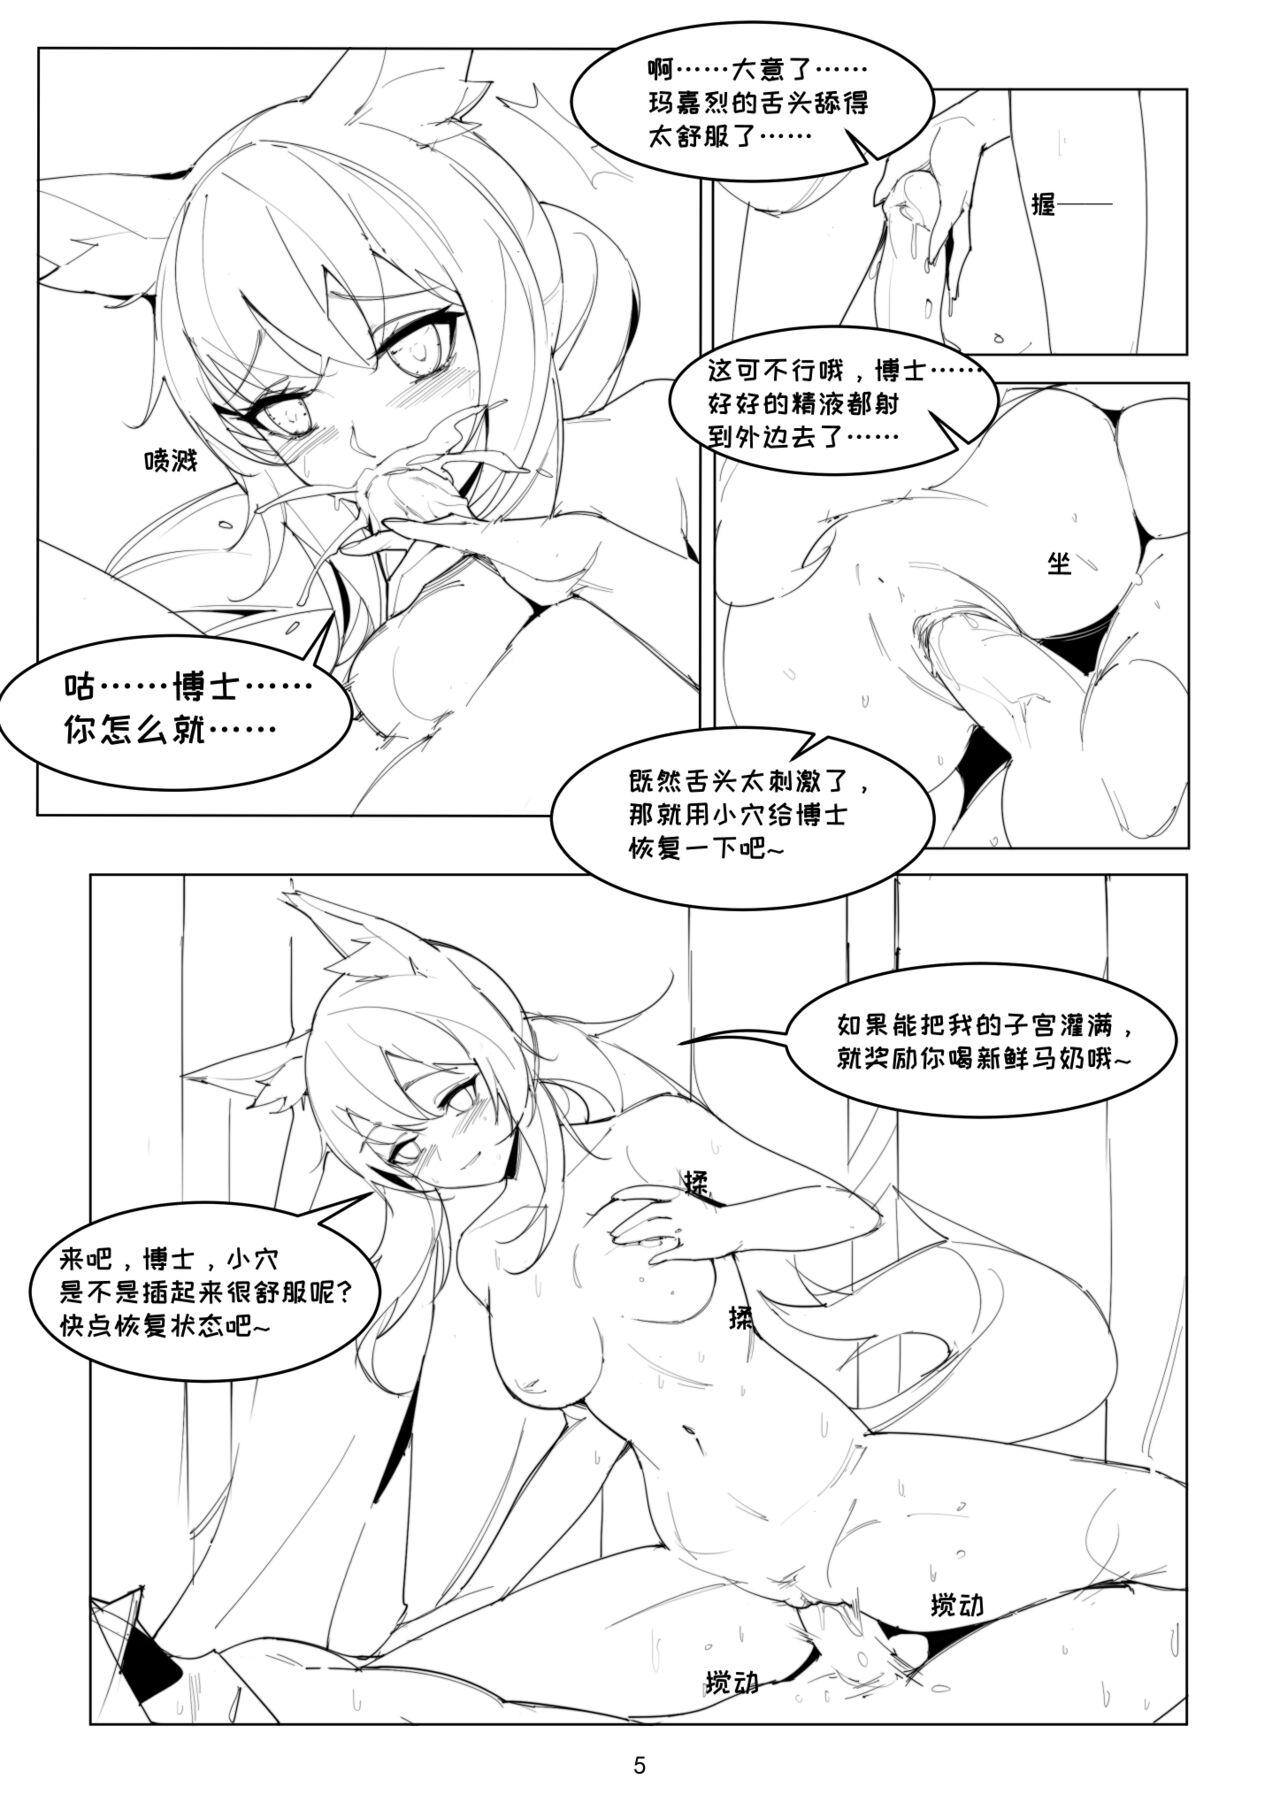 Novinha 【Tomorrow Ark】my love horse - Arknights 3some - Page 4